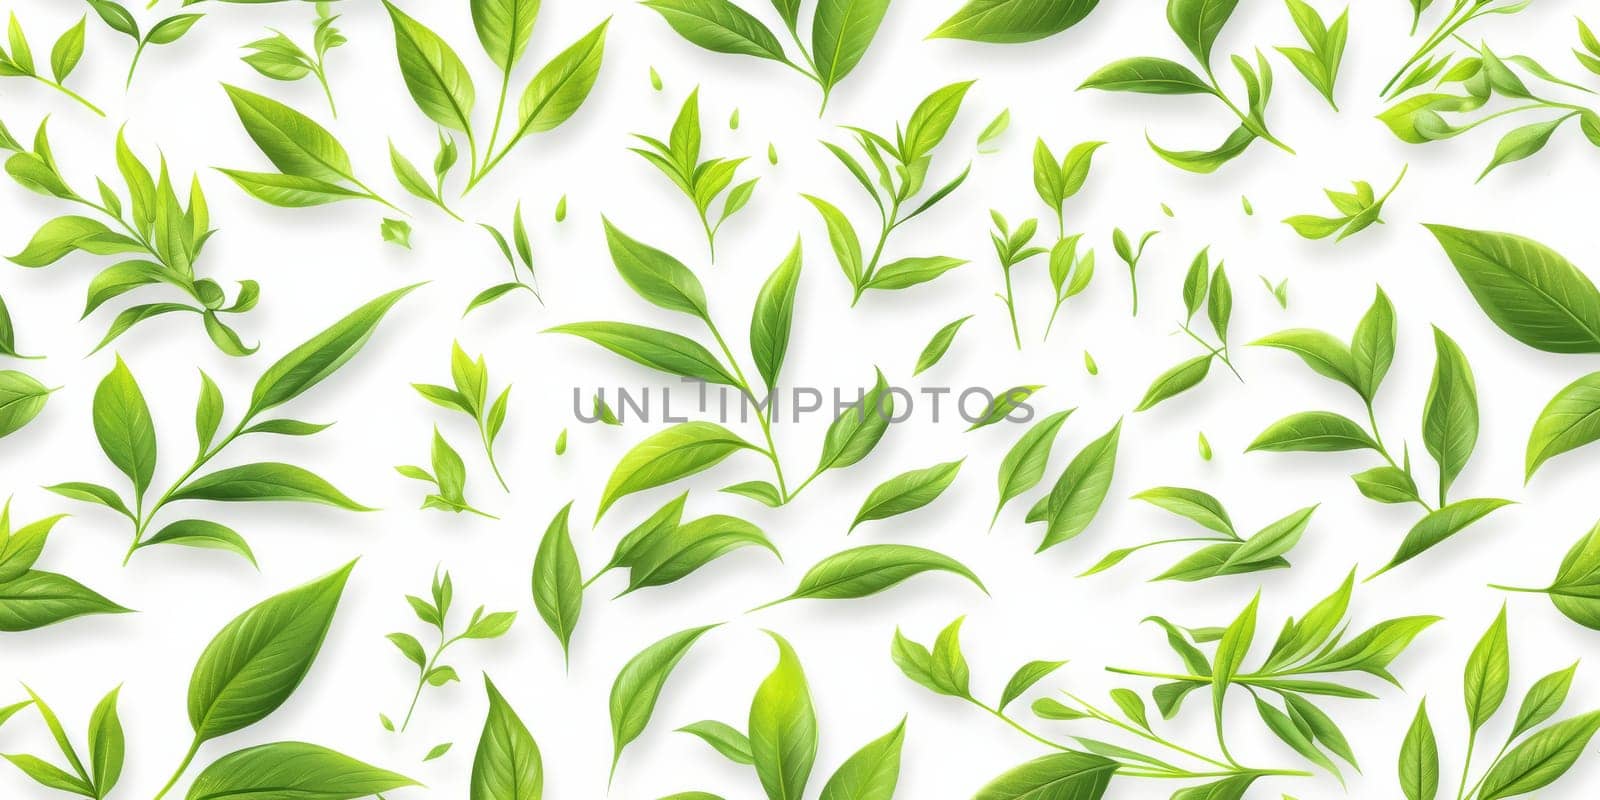 abstract seamless leaf texture, nature background, tropical leaf